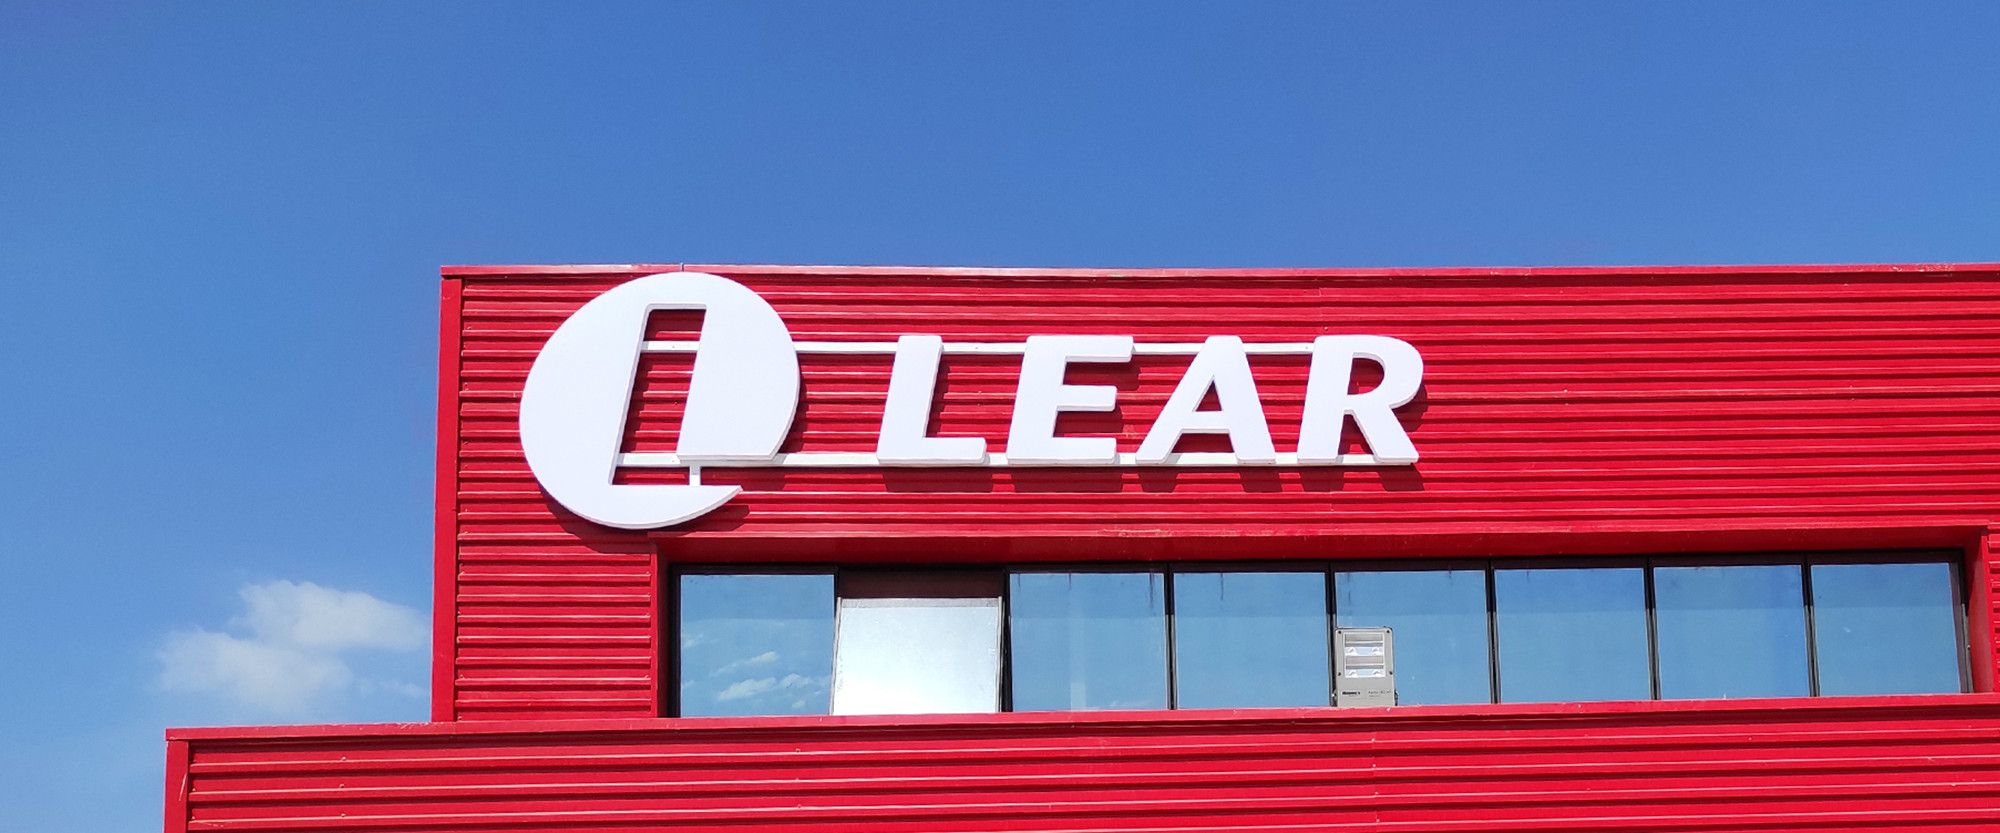 Company sign installation for Lear Corporation on one of its 12 new site acquistions.